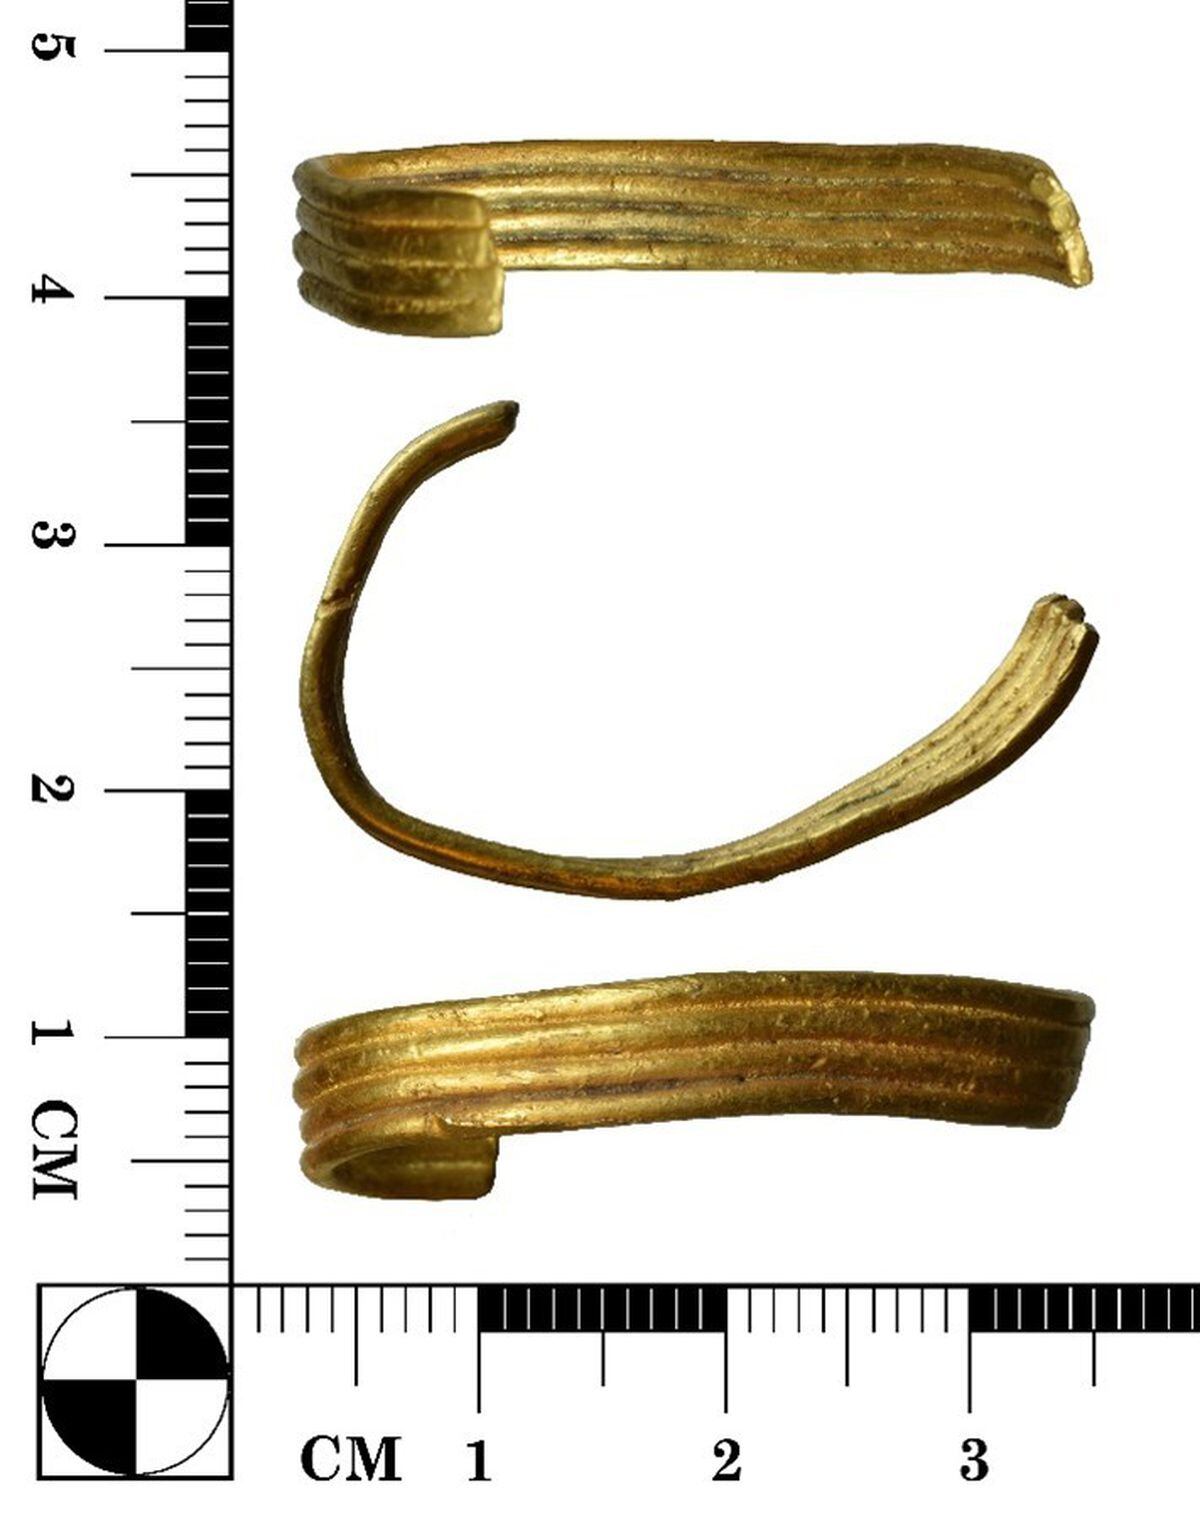 Gold penannular ring. Picture: British Museum Portable Antiquities Service